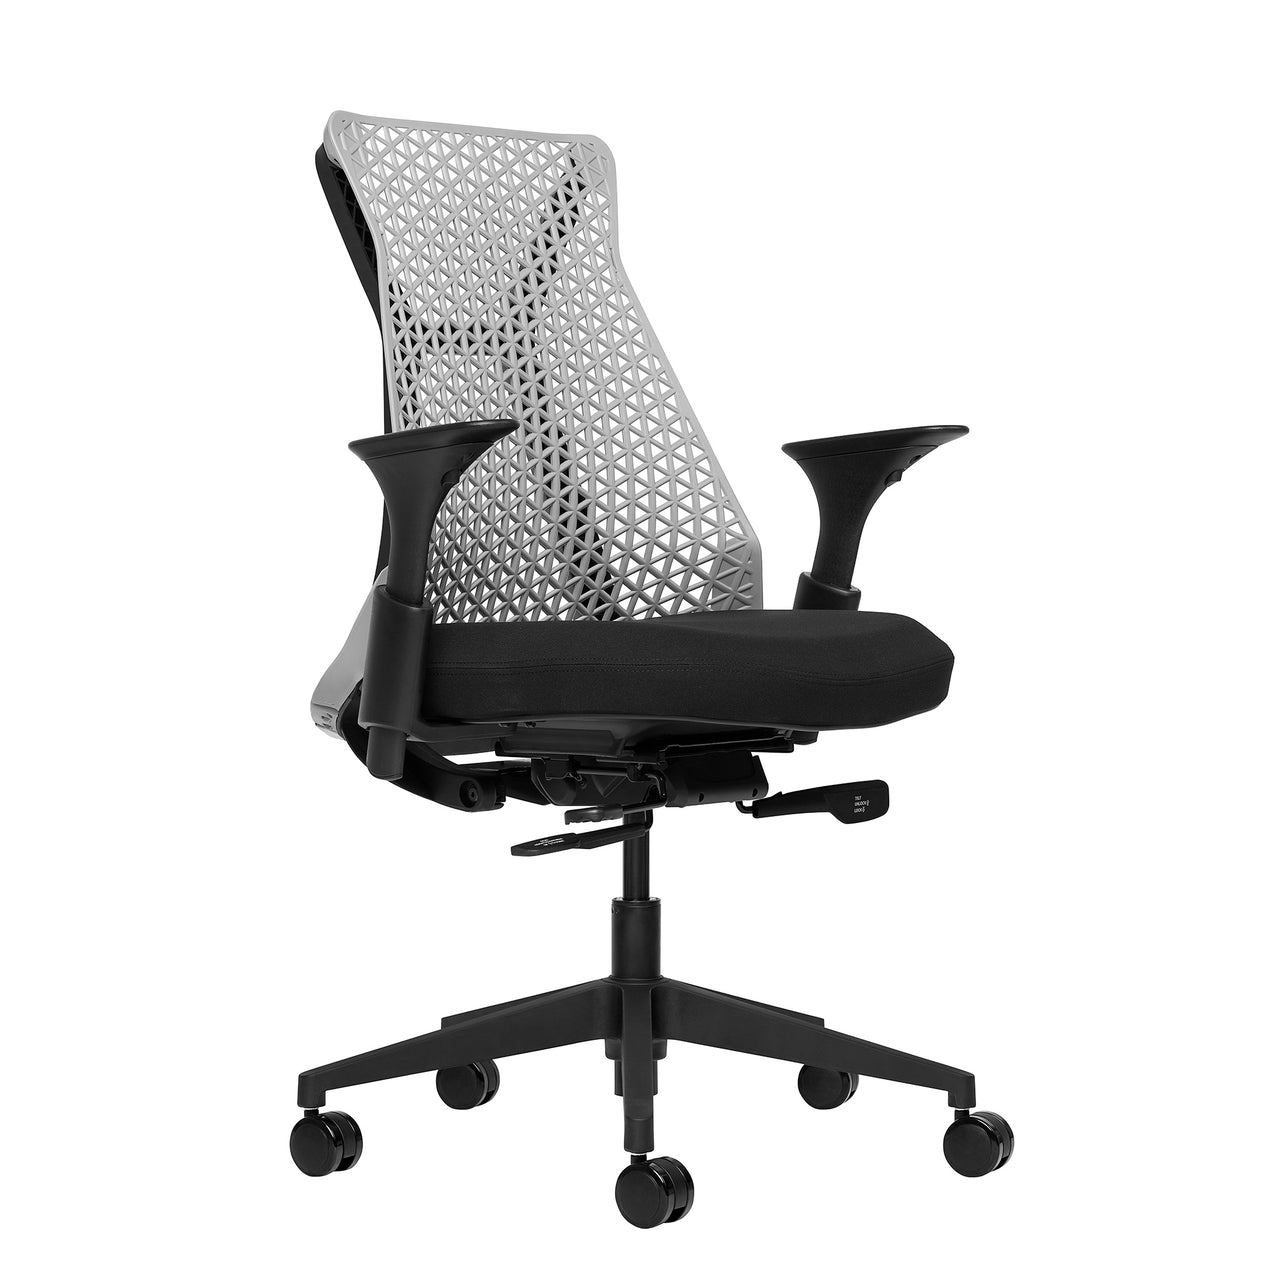 Bowery Management Chair (Grey/Black)